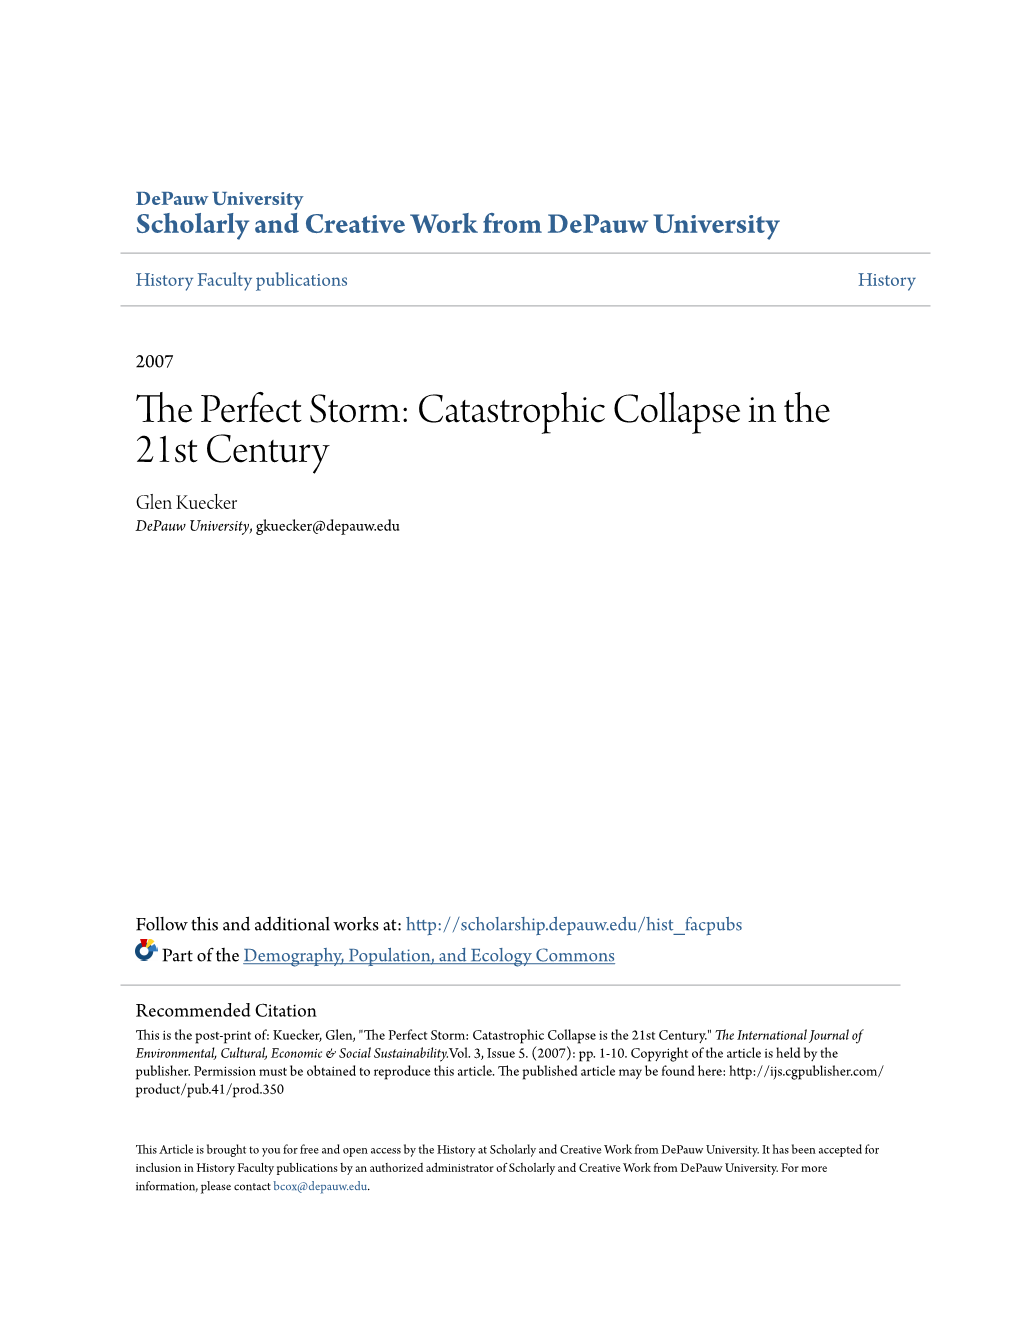 The Perfect Storm: Catastrophic Collapse in the 21St Century